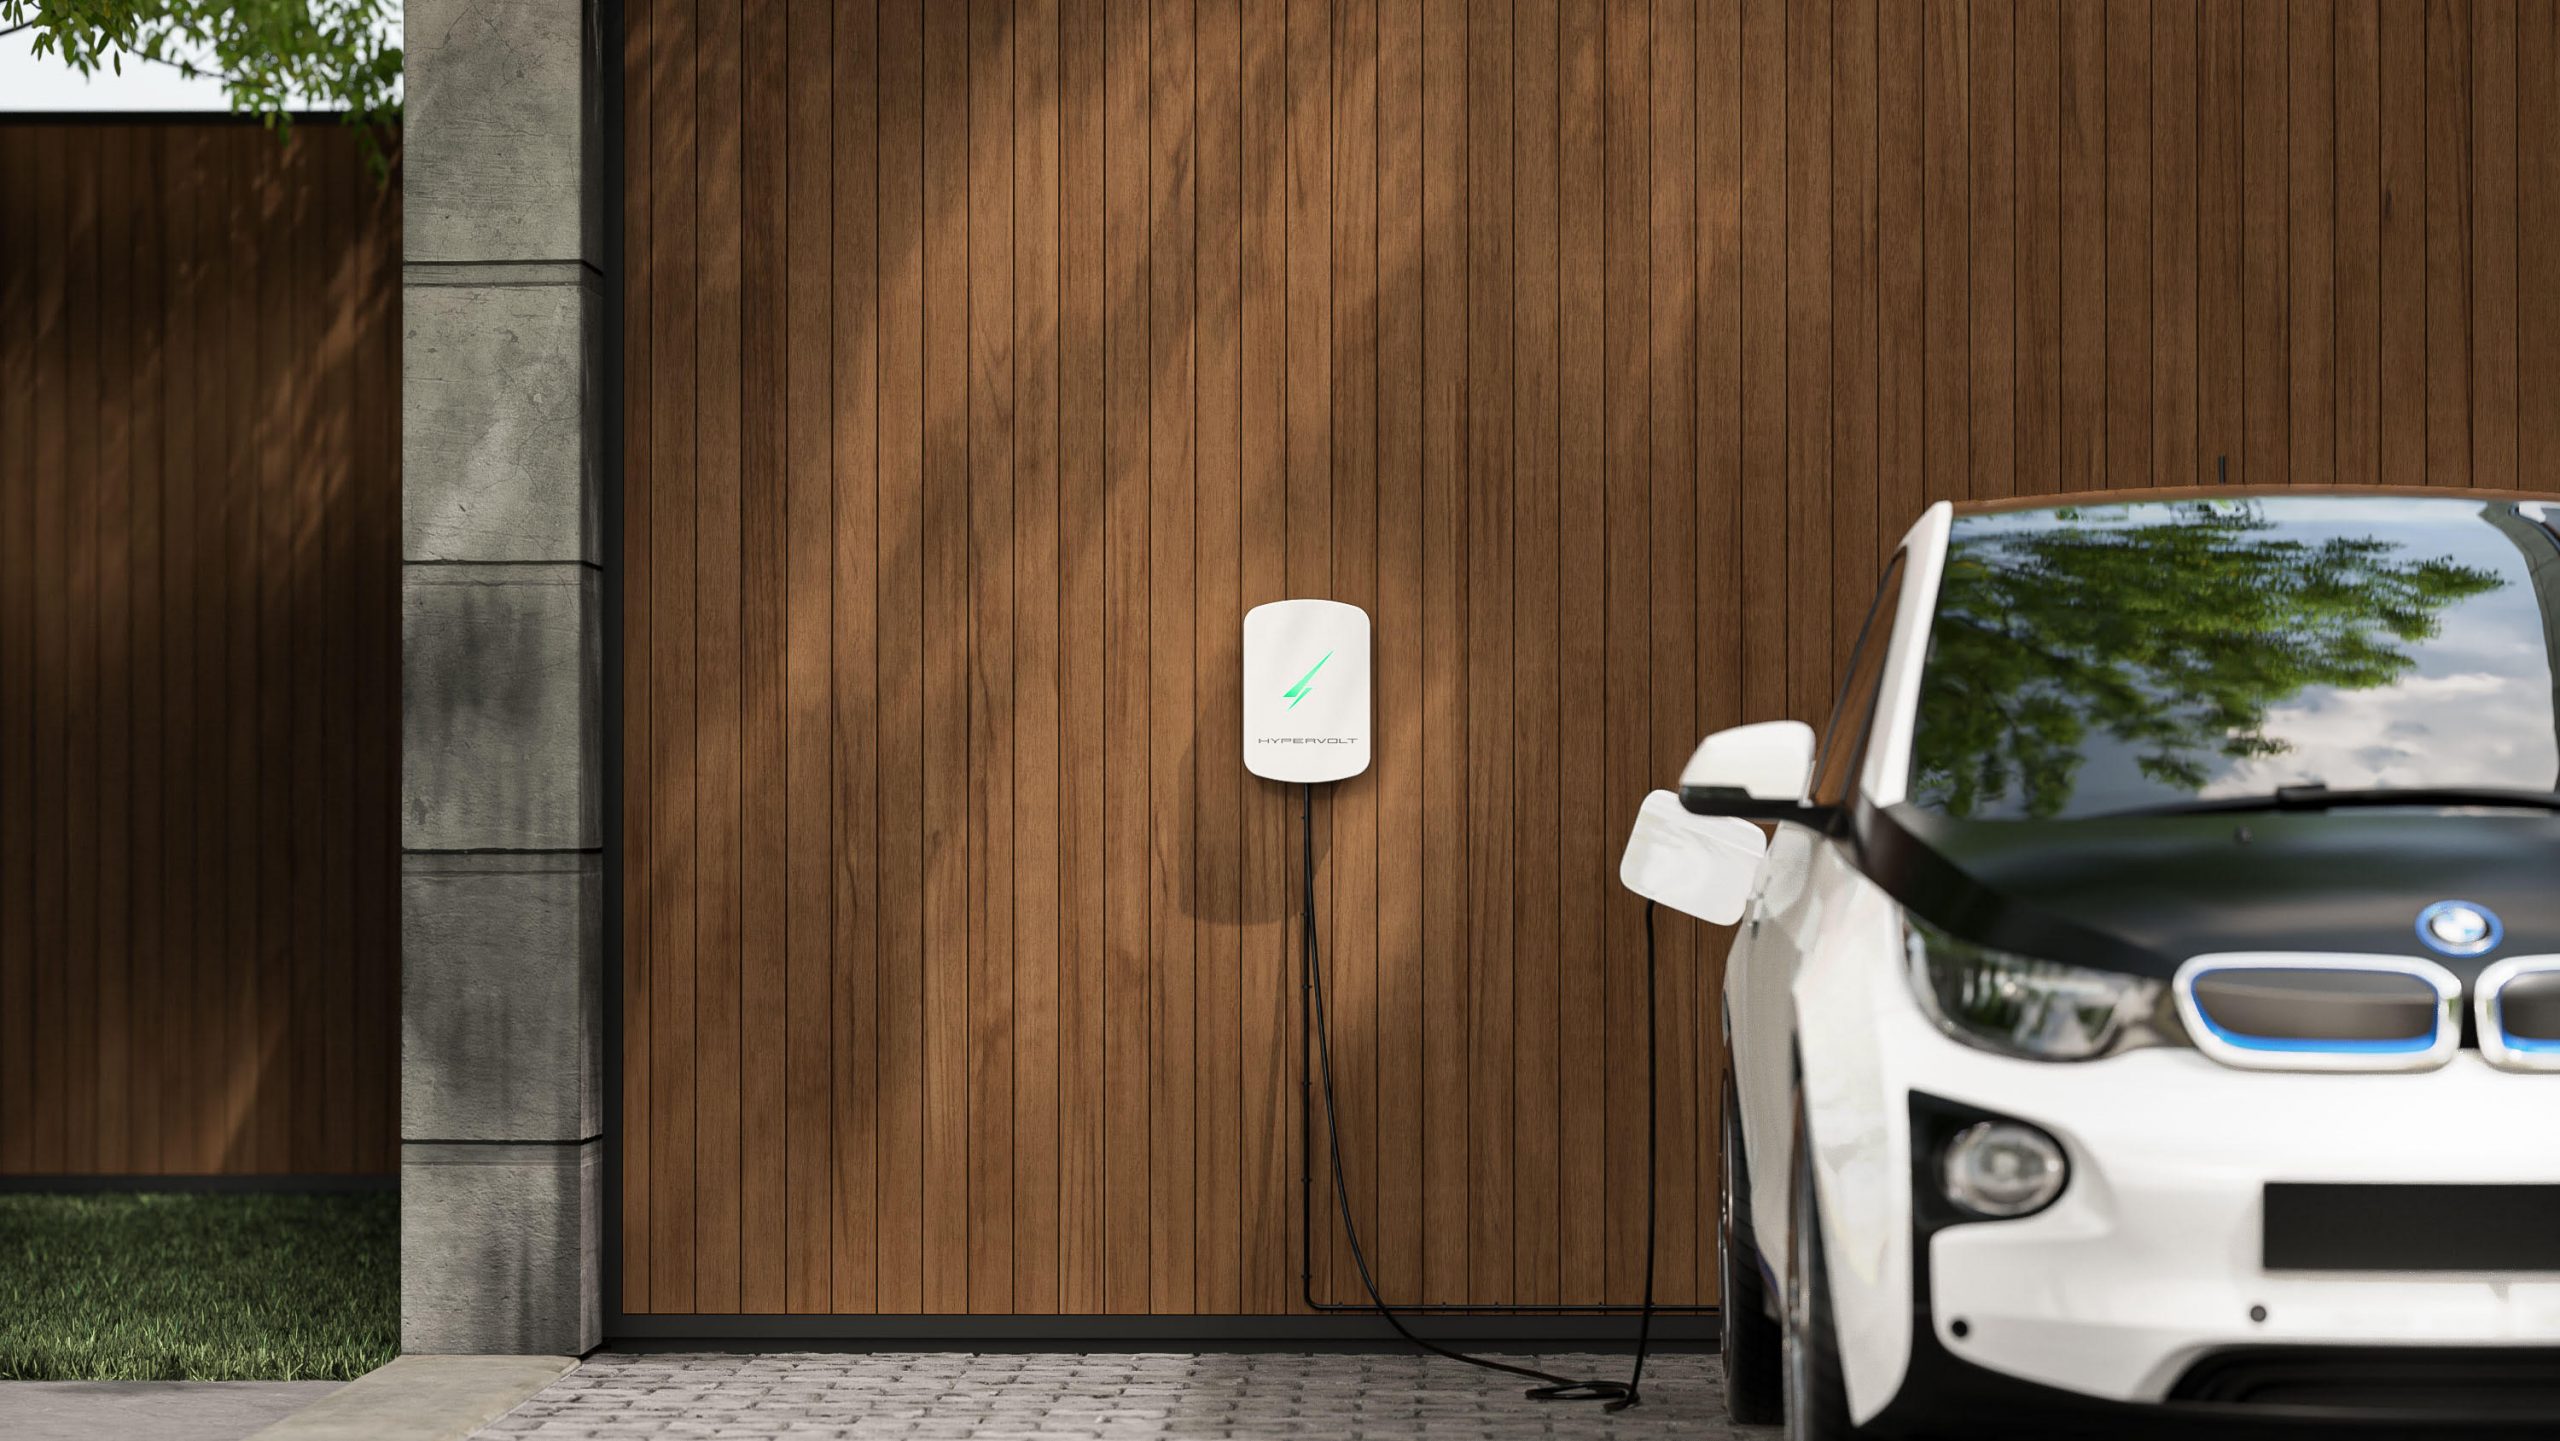 EV Charge Point Product News